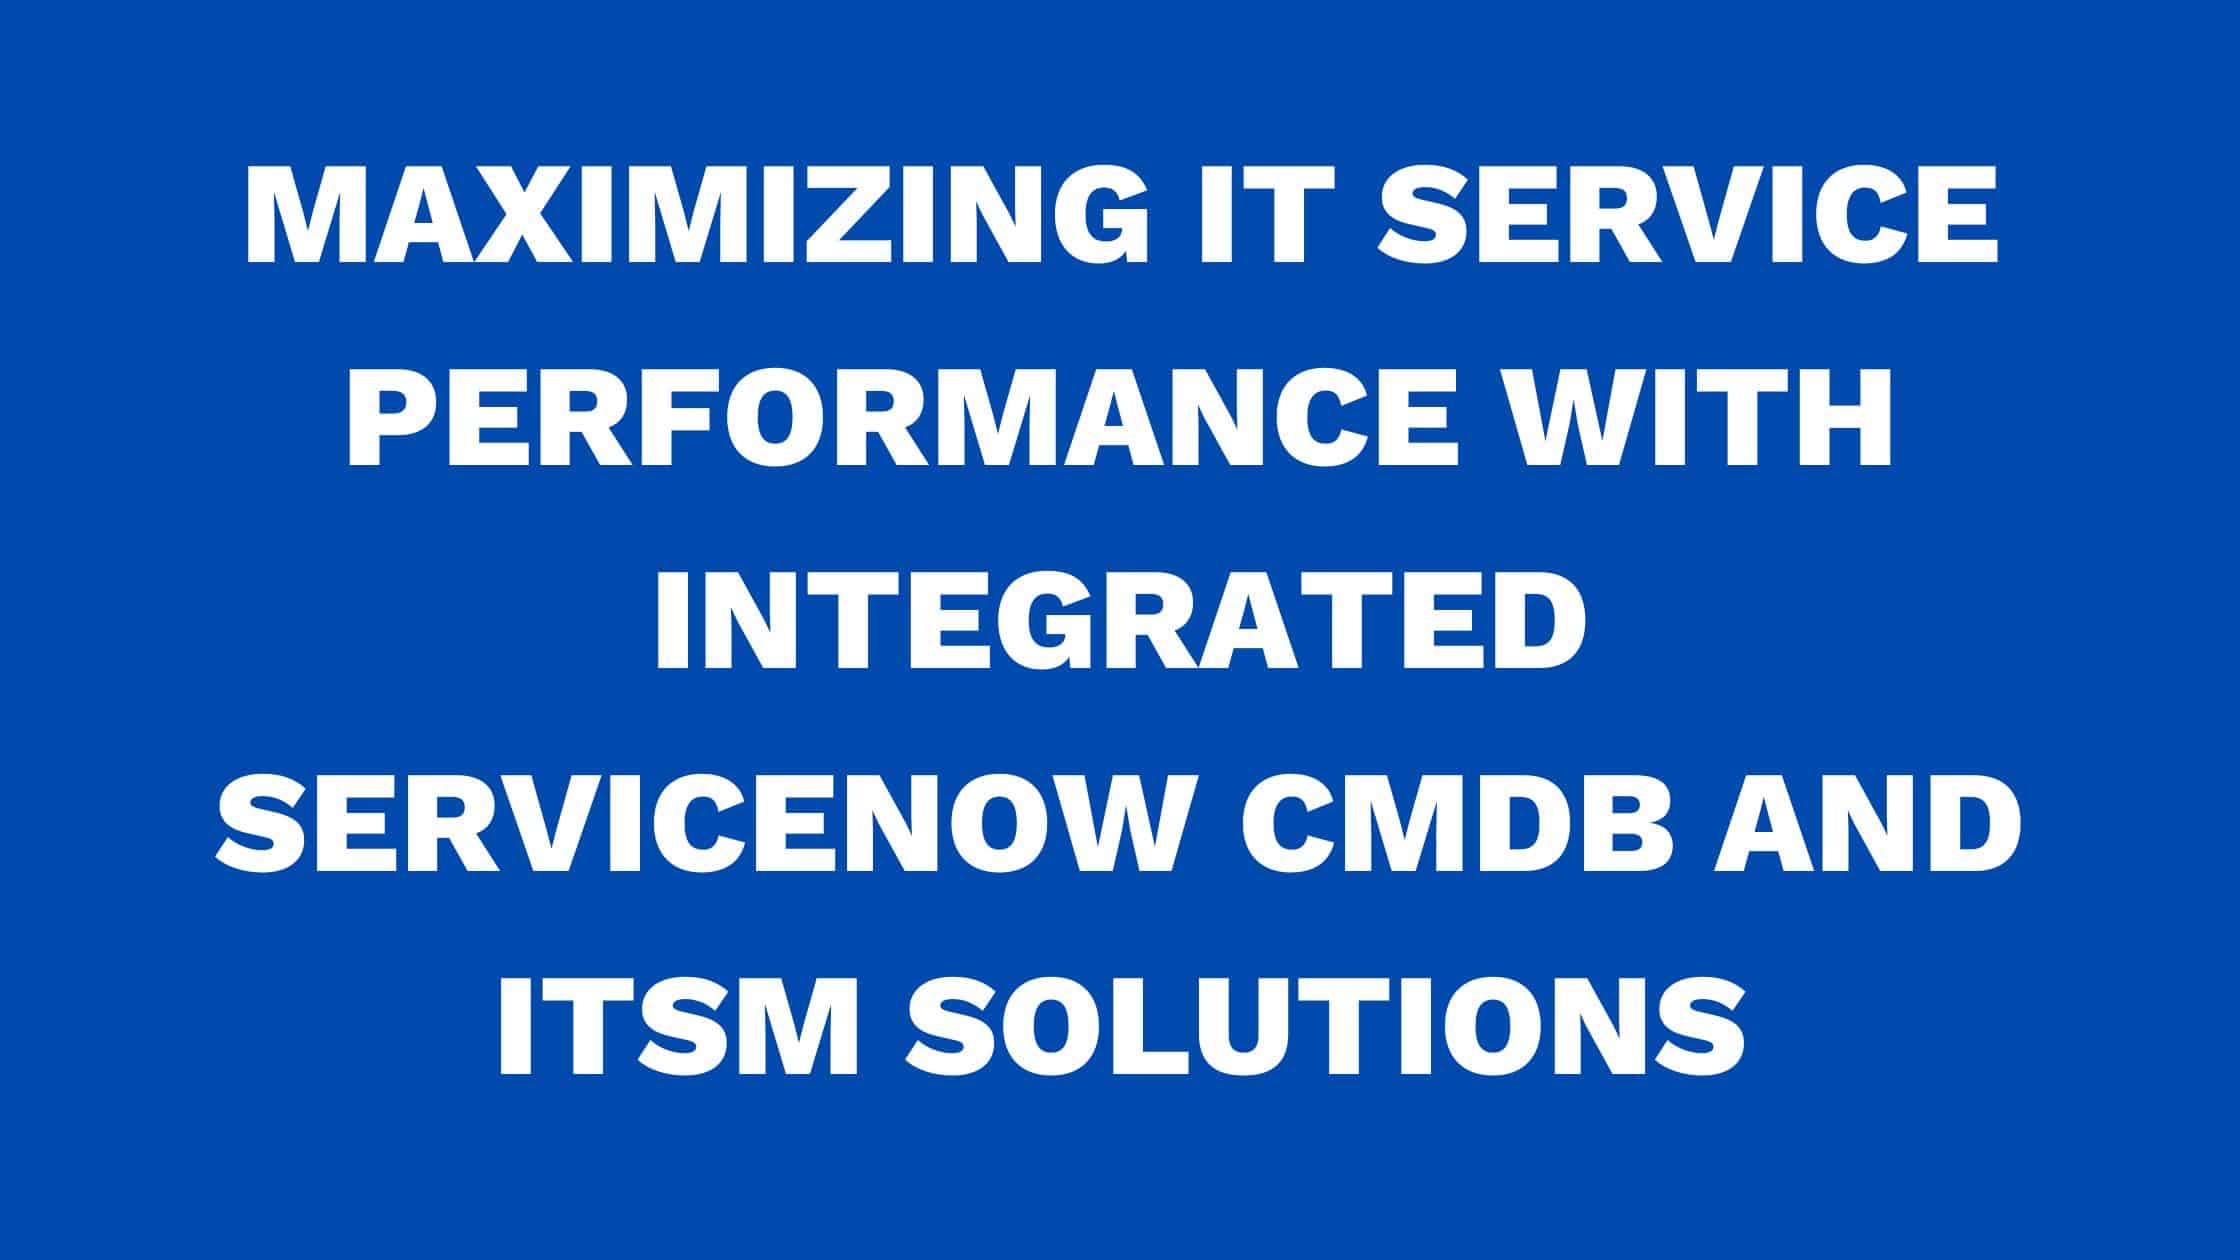 Maximizing IT service performance with Integrated ServiceNow CMDB and ITSM solutions